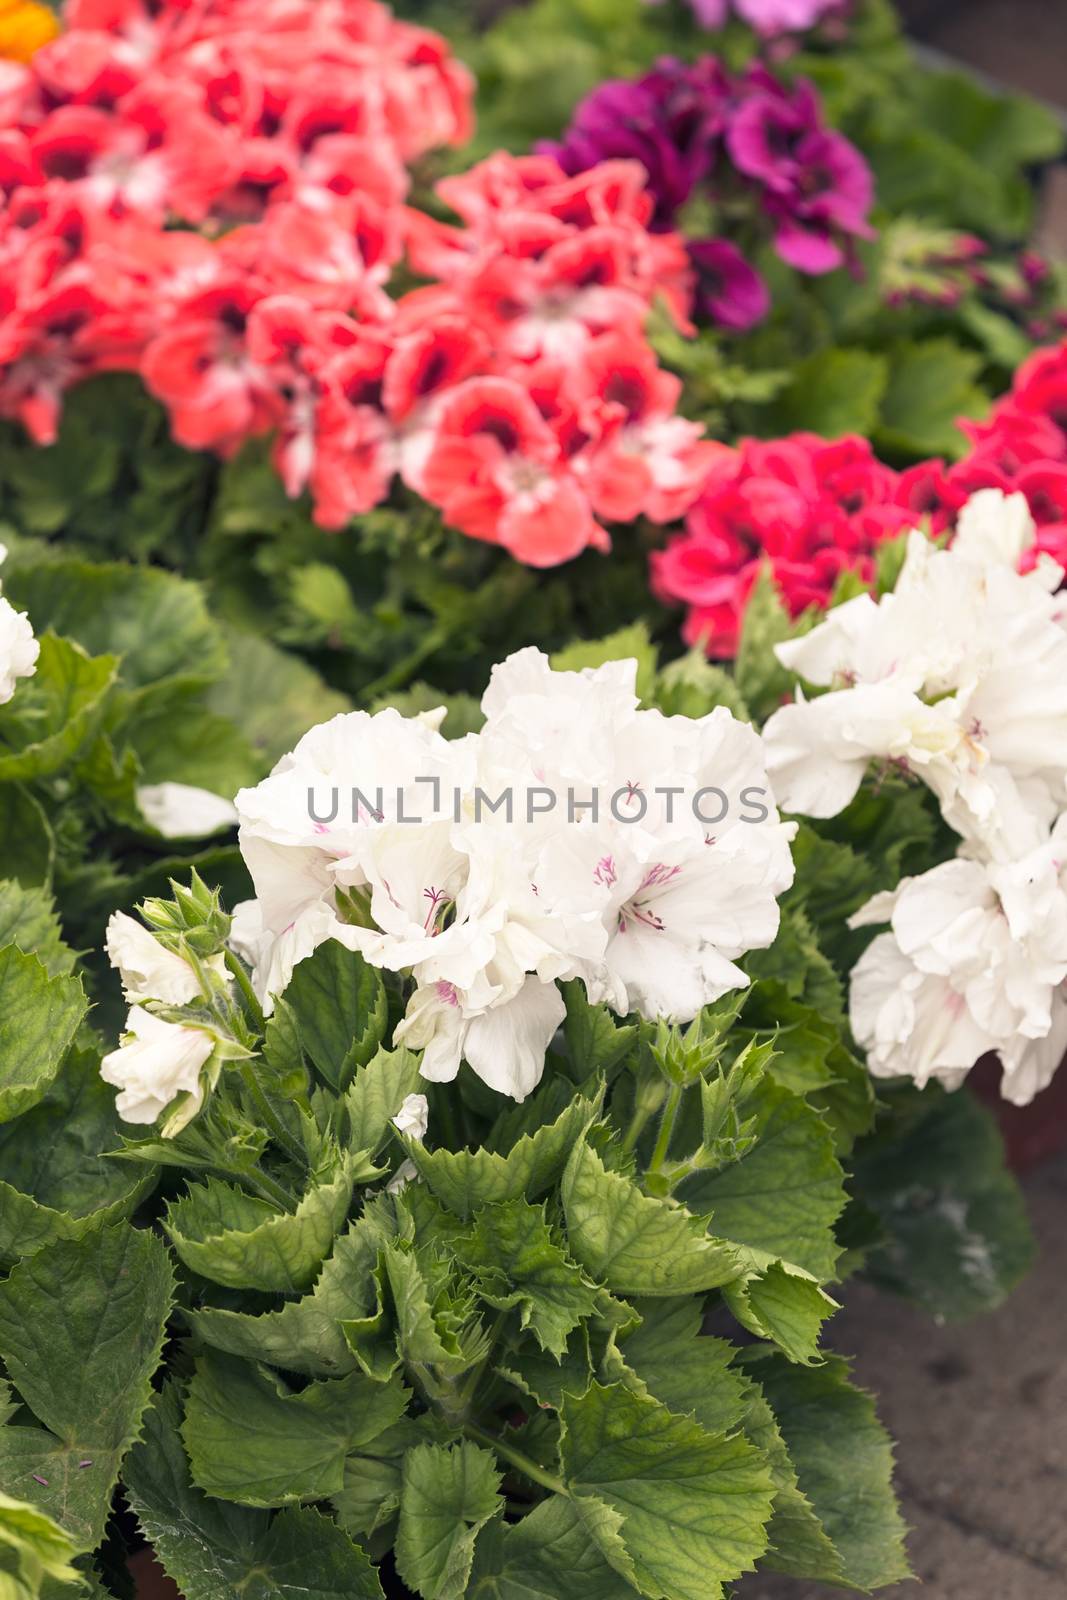 flowers of different colors, note shallow depth of field